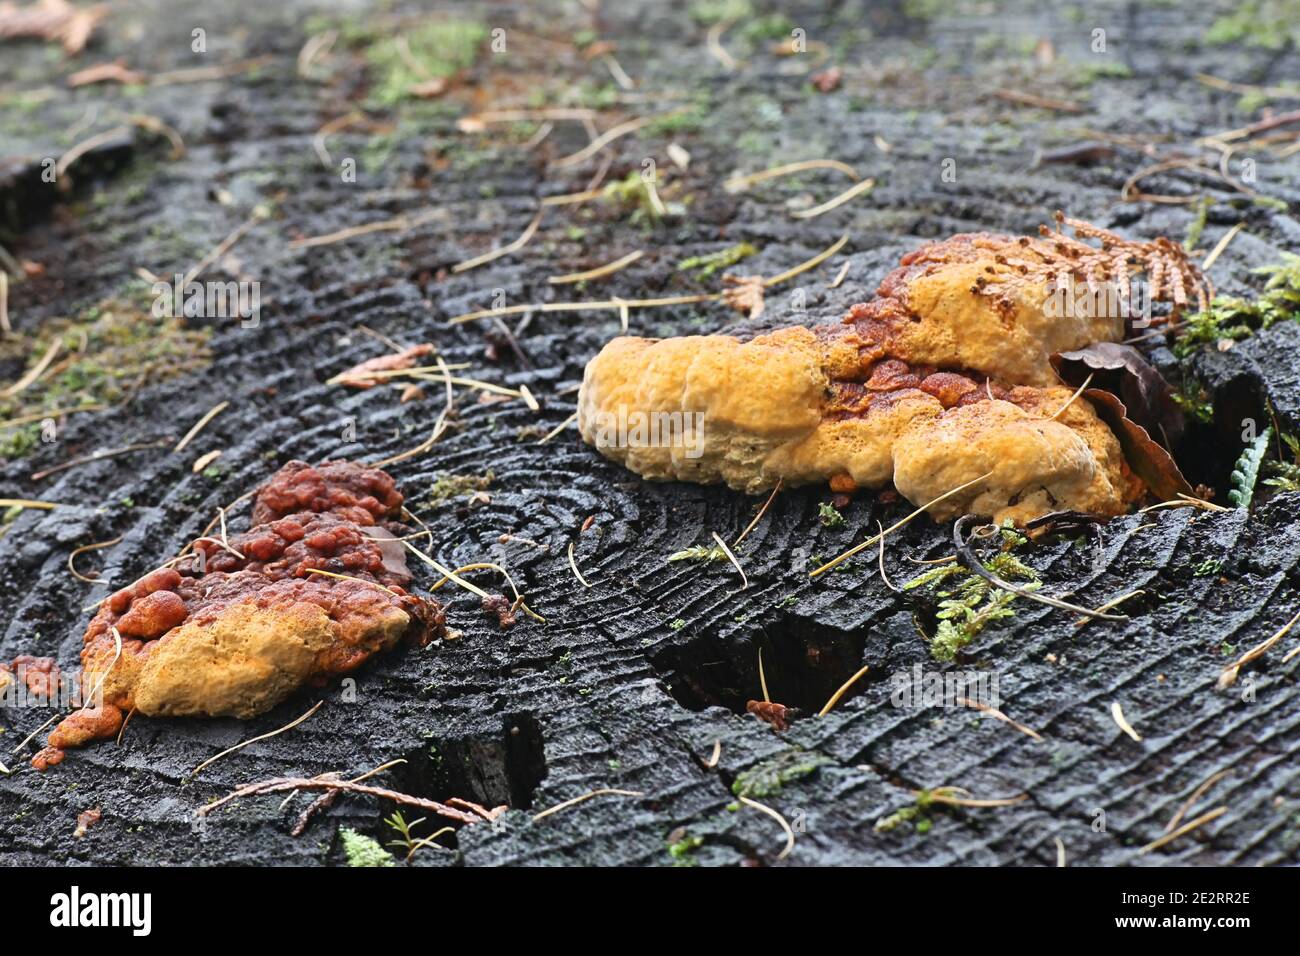 Gloeophyllum odoratum, known as the  Anise Mazegill and Brown Rot Fungus, a polypore from Finland Stock Photo